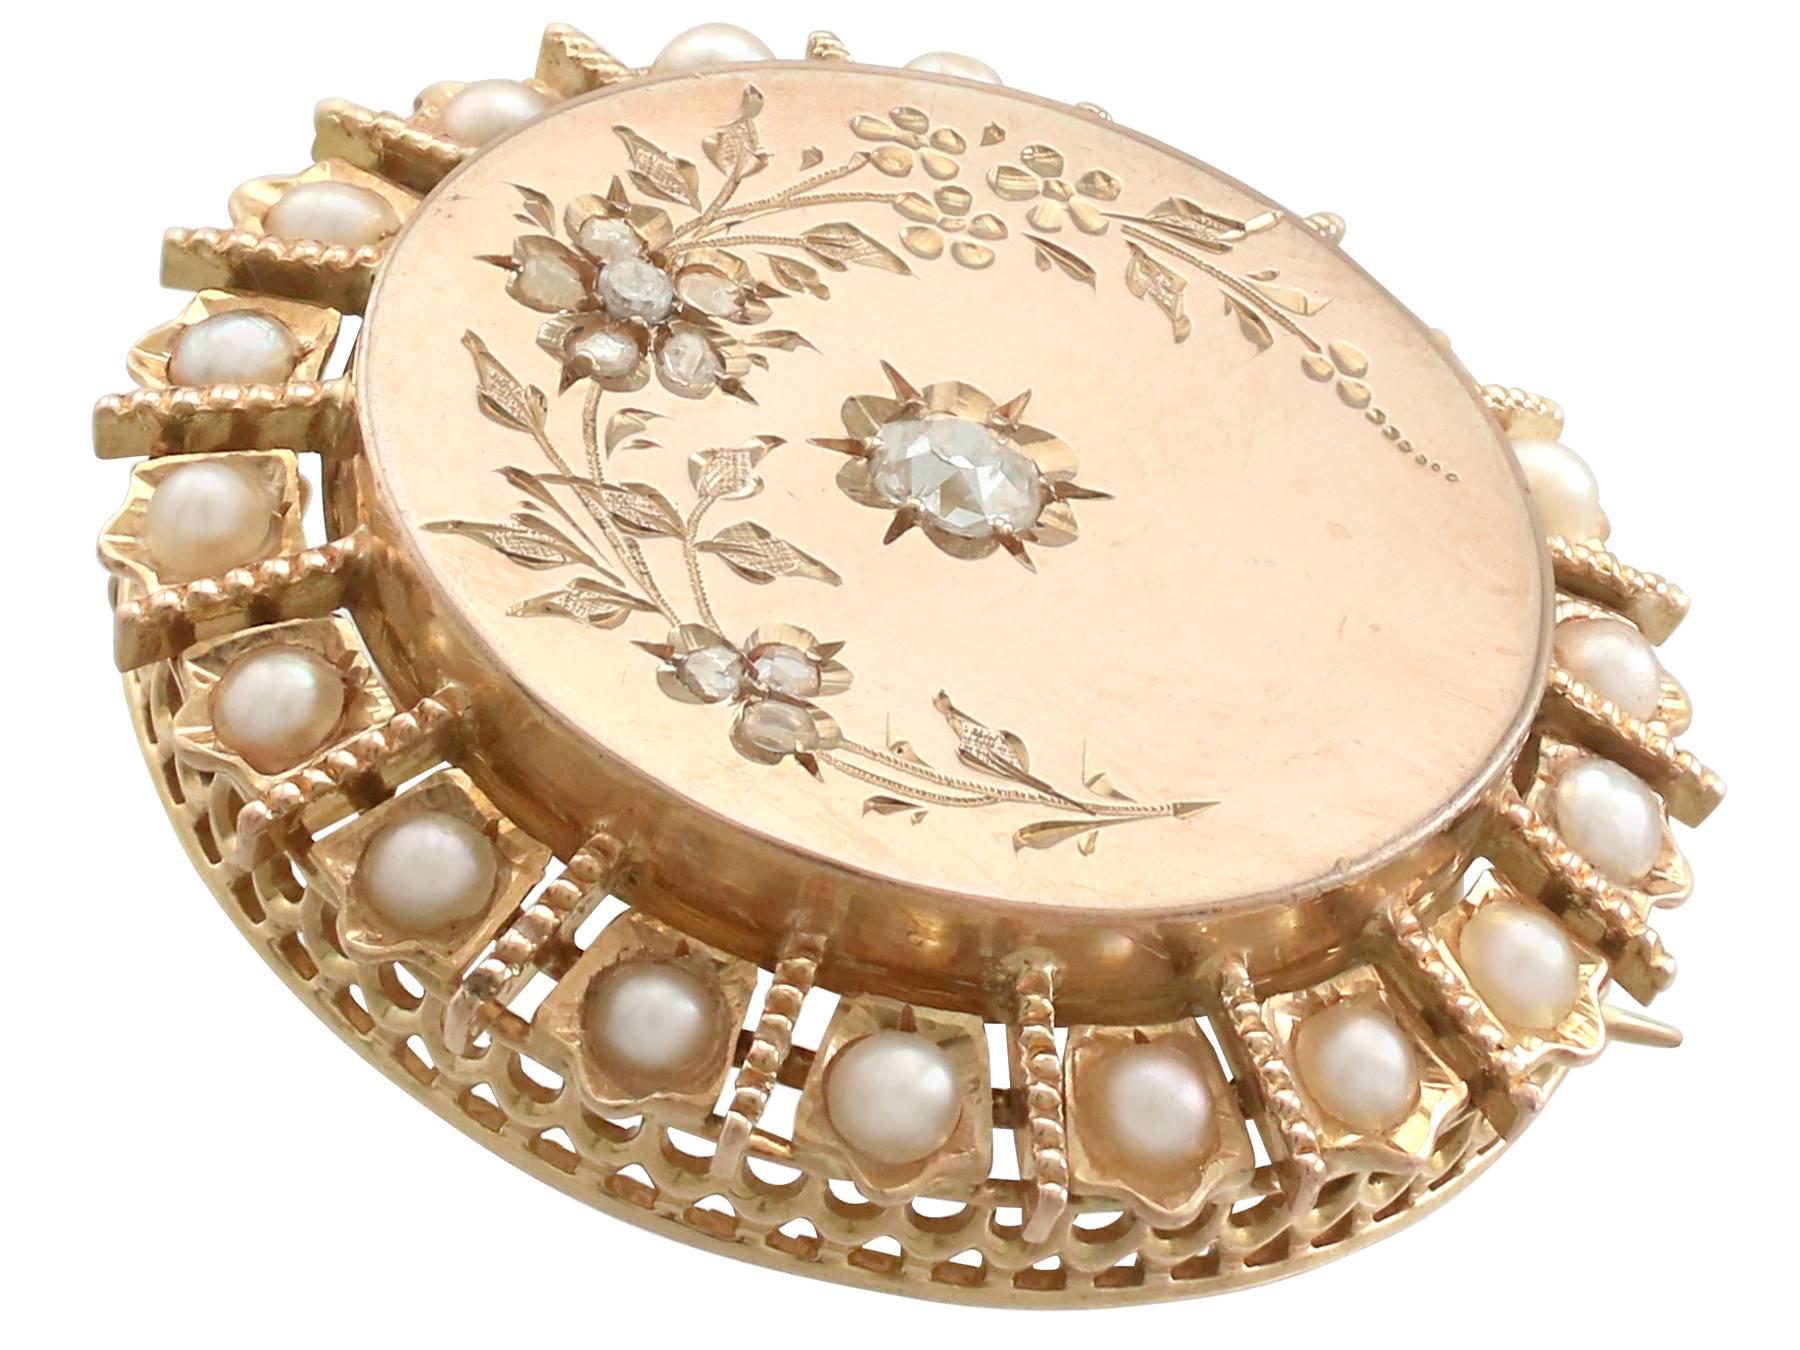 An impressive antique French seed pearl and 0.25 carat diamond, 18 karat yellow gold brooch; part of our diverse antique jewelry collections.

This fine and impressive antique pearl and diamond brooch has been crafted in 18k yellow gold.

The brooch